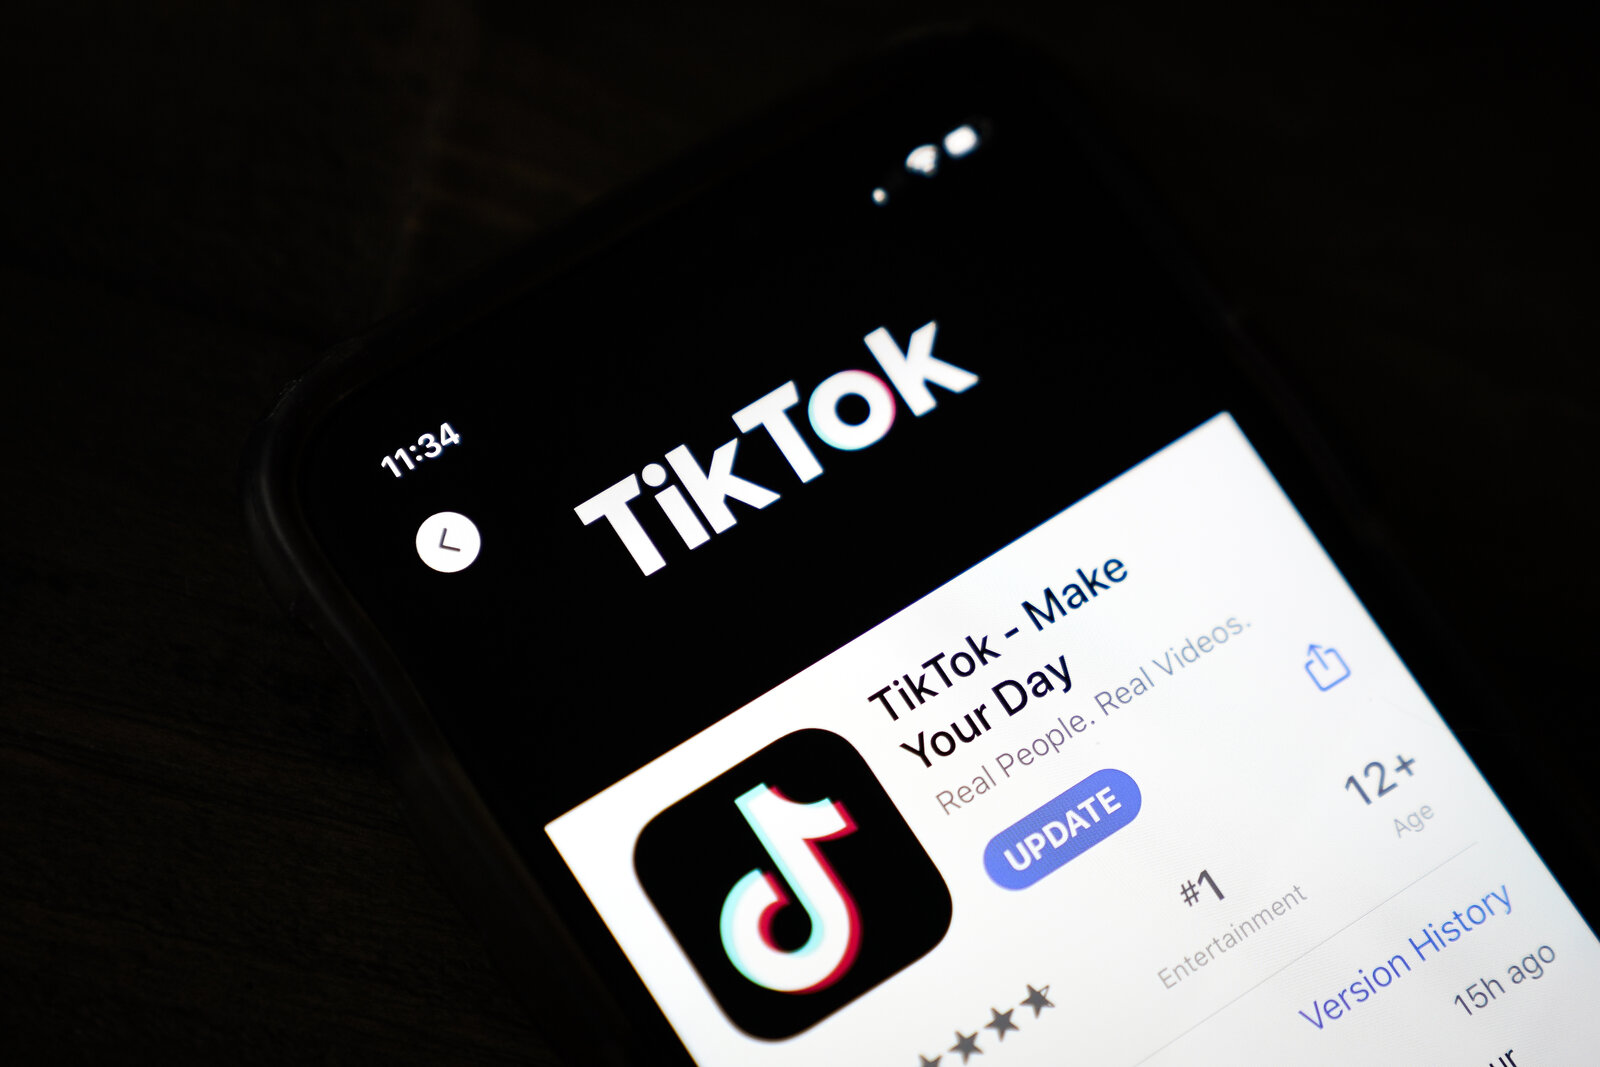 There are a bunch of games hidden in your TikTok application right now